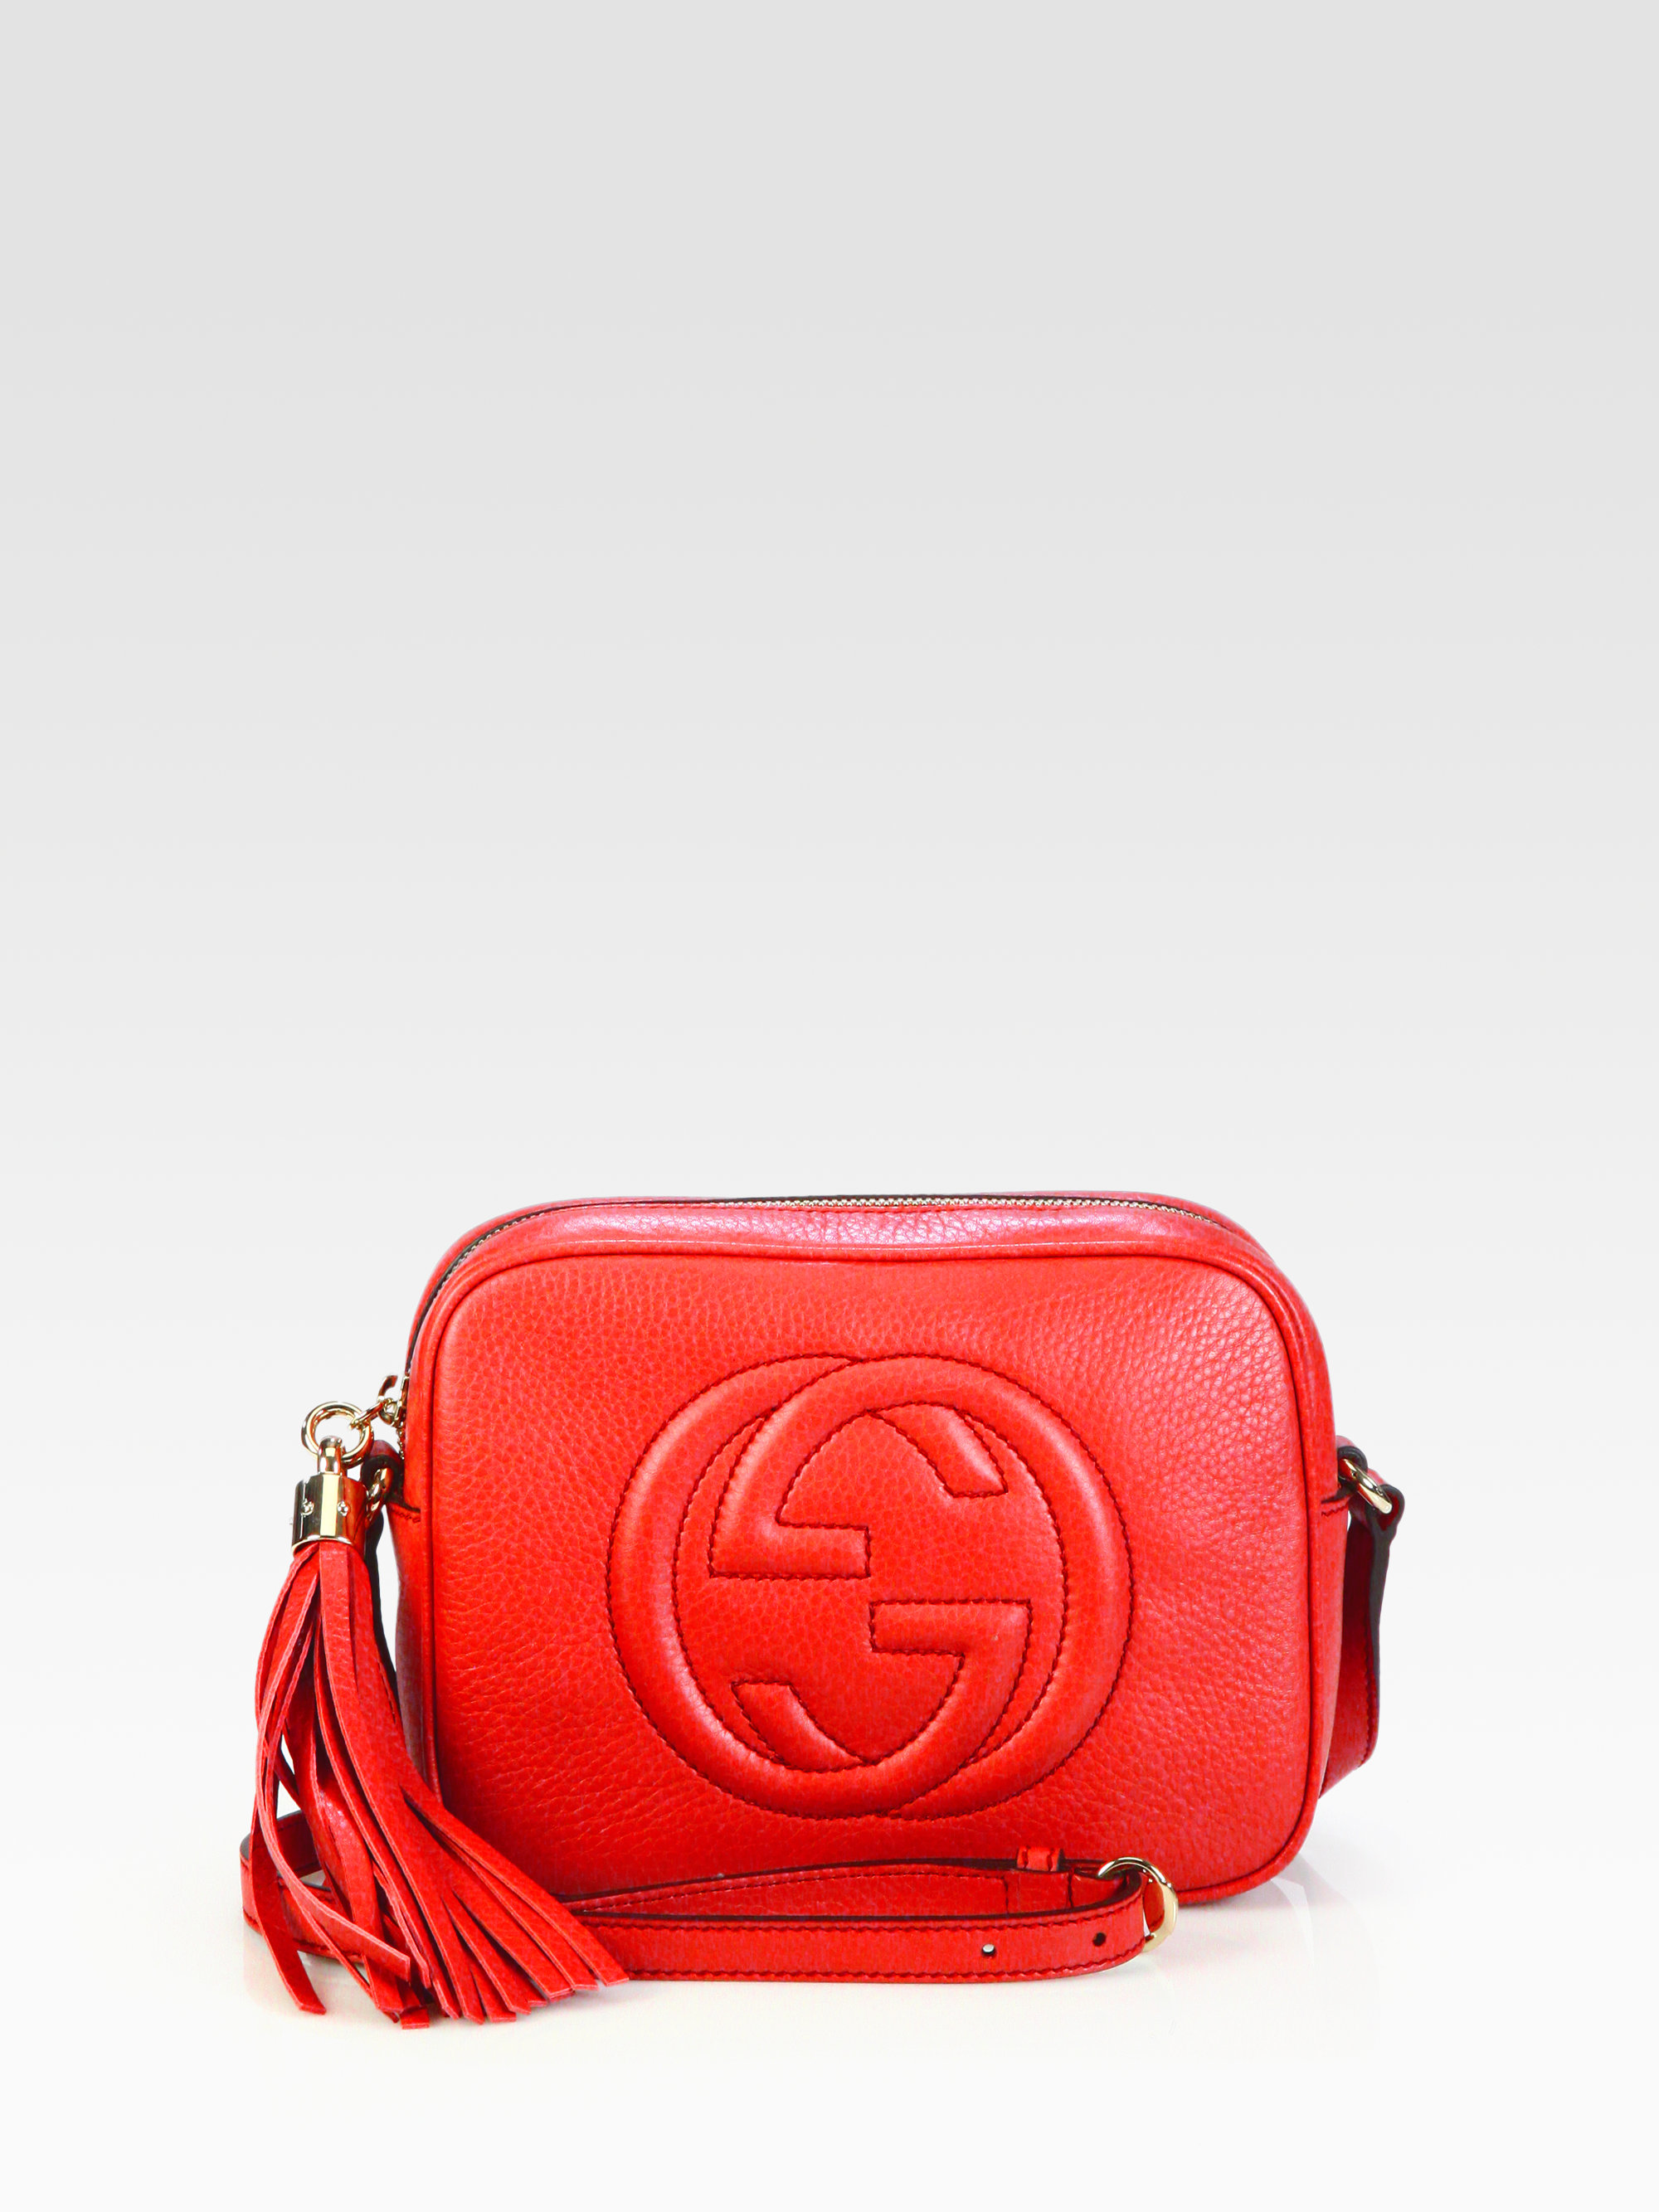 Gucci Soho Leather Disco Bag in Red | Lyst